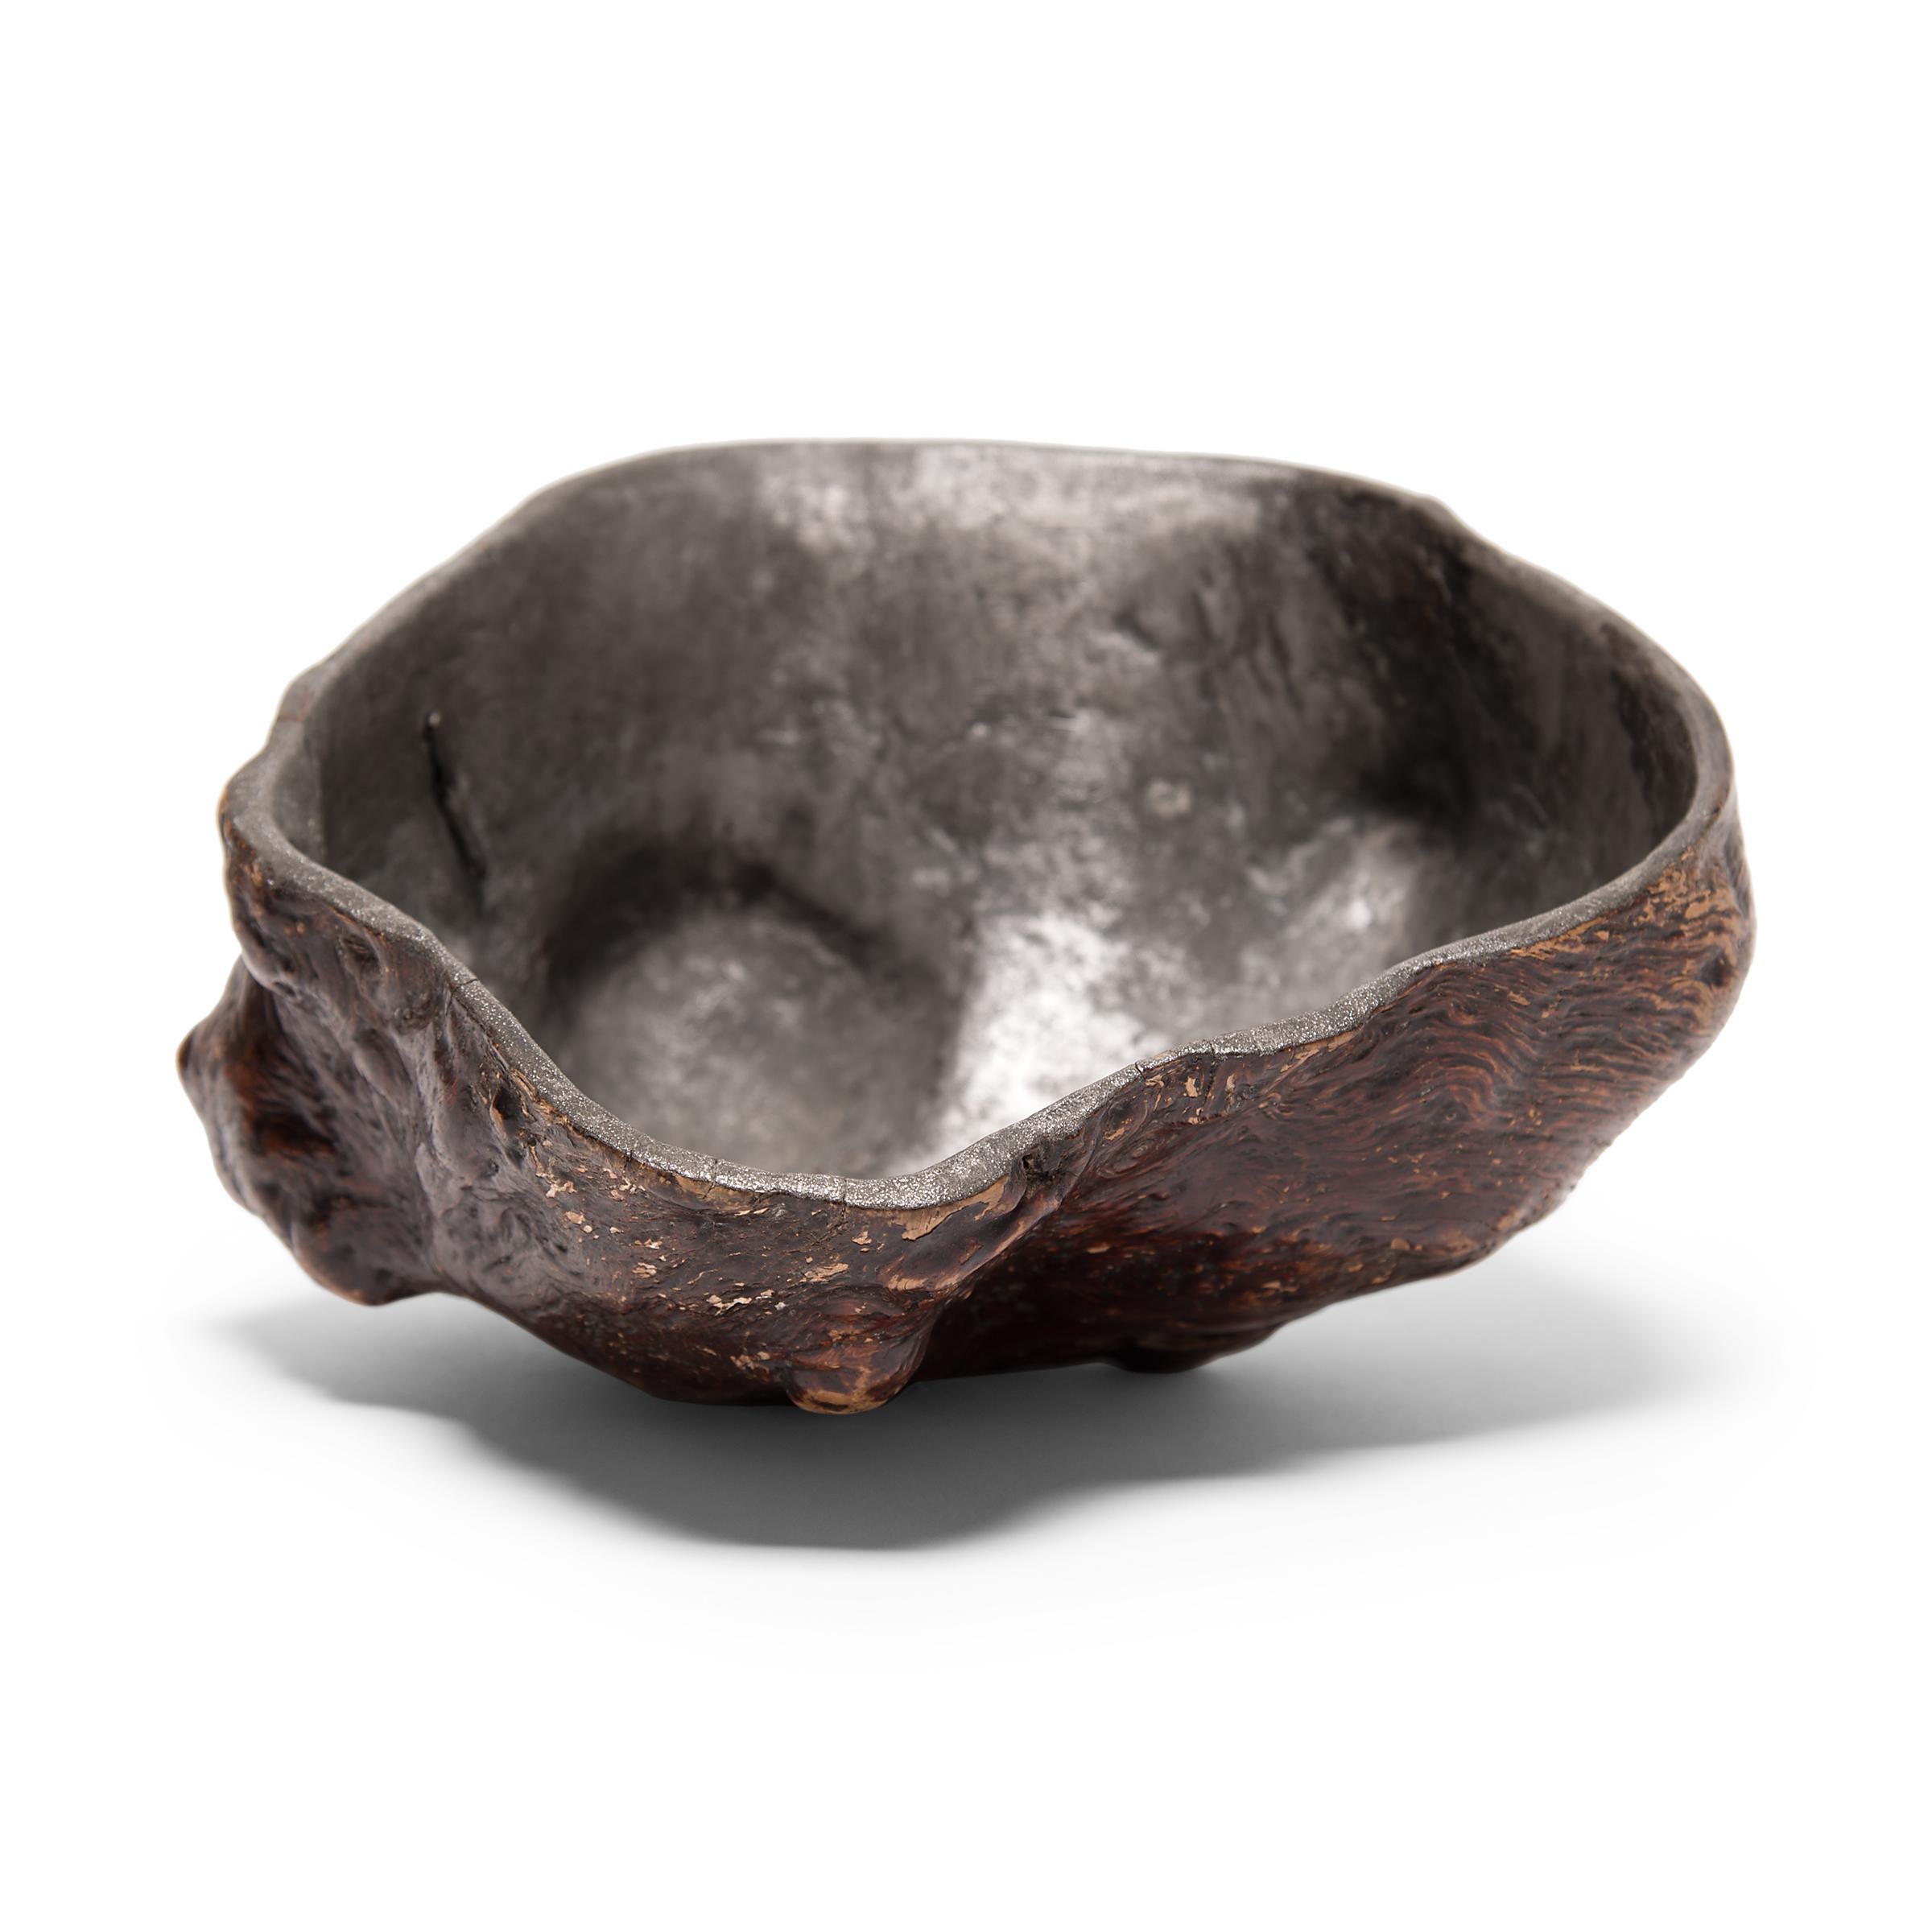 Like brush pots, libation cups are made in a variety of sizes and woods. Some maintain the natural contours of the wood, others enjoy skillful carvings. This grand 17th century natural burl wood example is unusually lined in pewter. The wood has